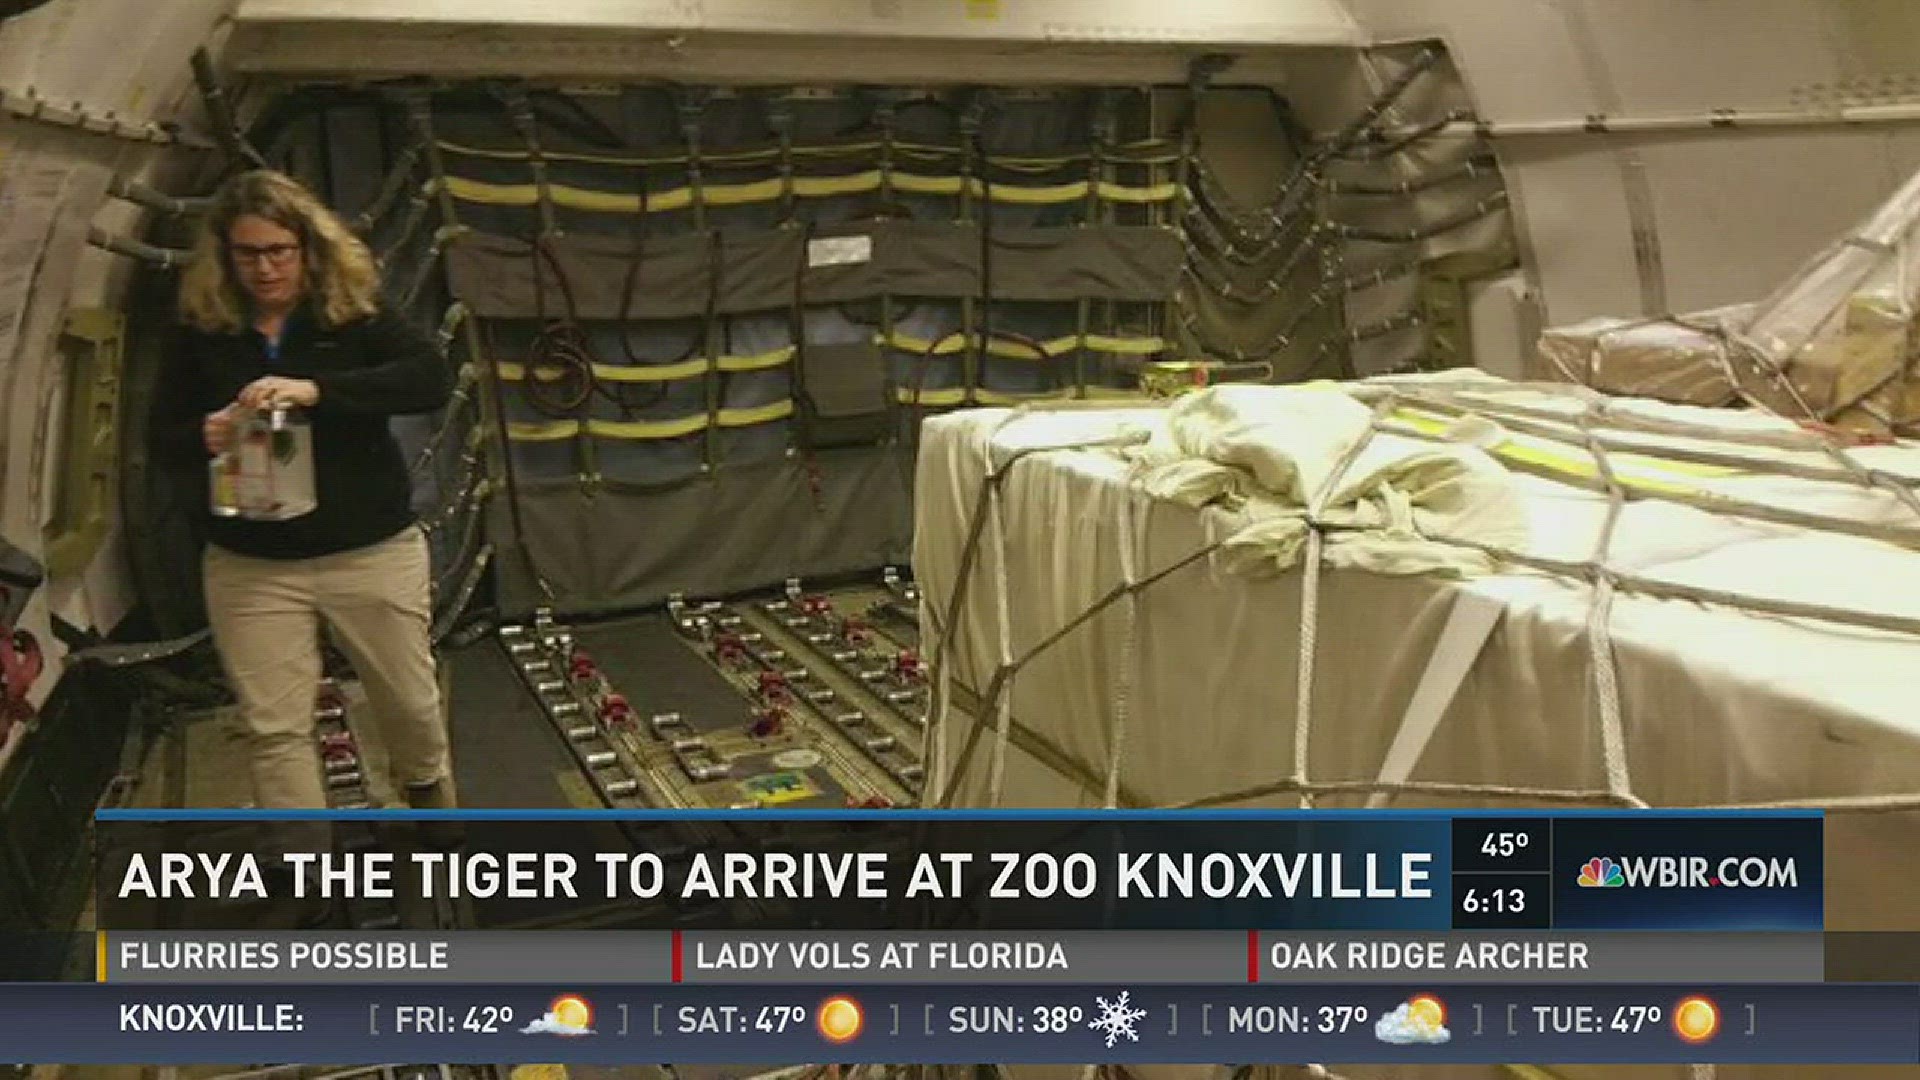 Jan. 26, 2017: Arya the Malaysian tiger is traveling by FedEx all the way from California to Zoo Knoxville.